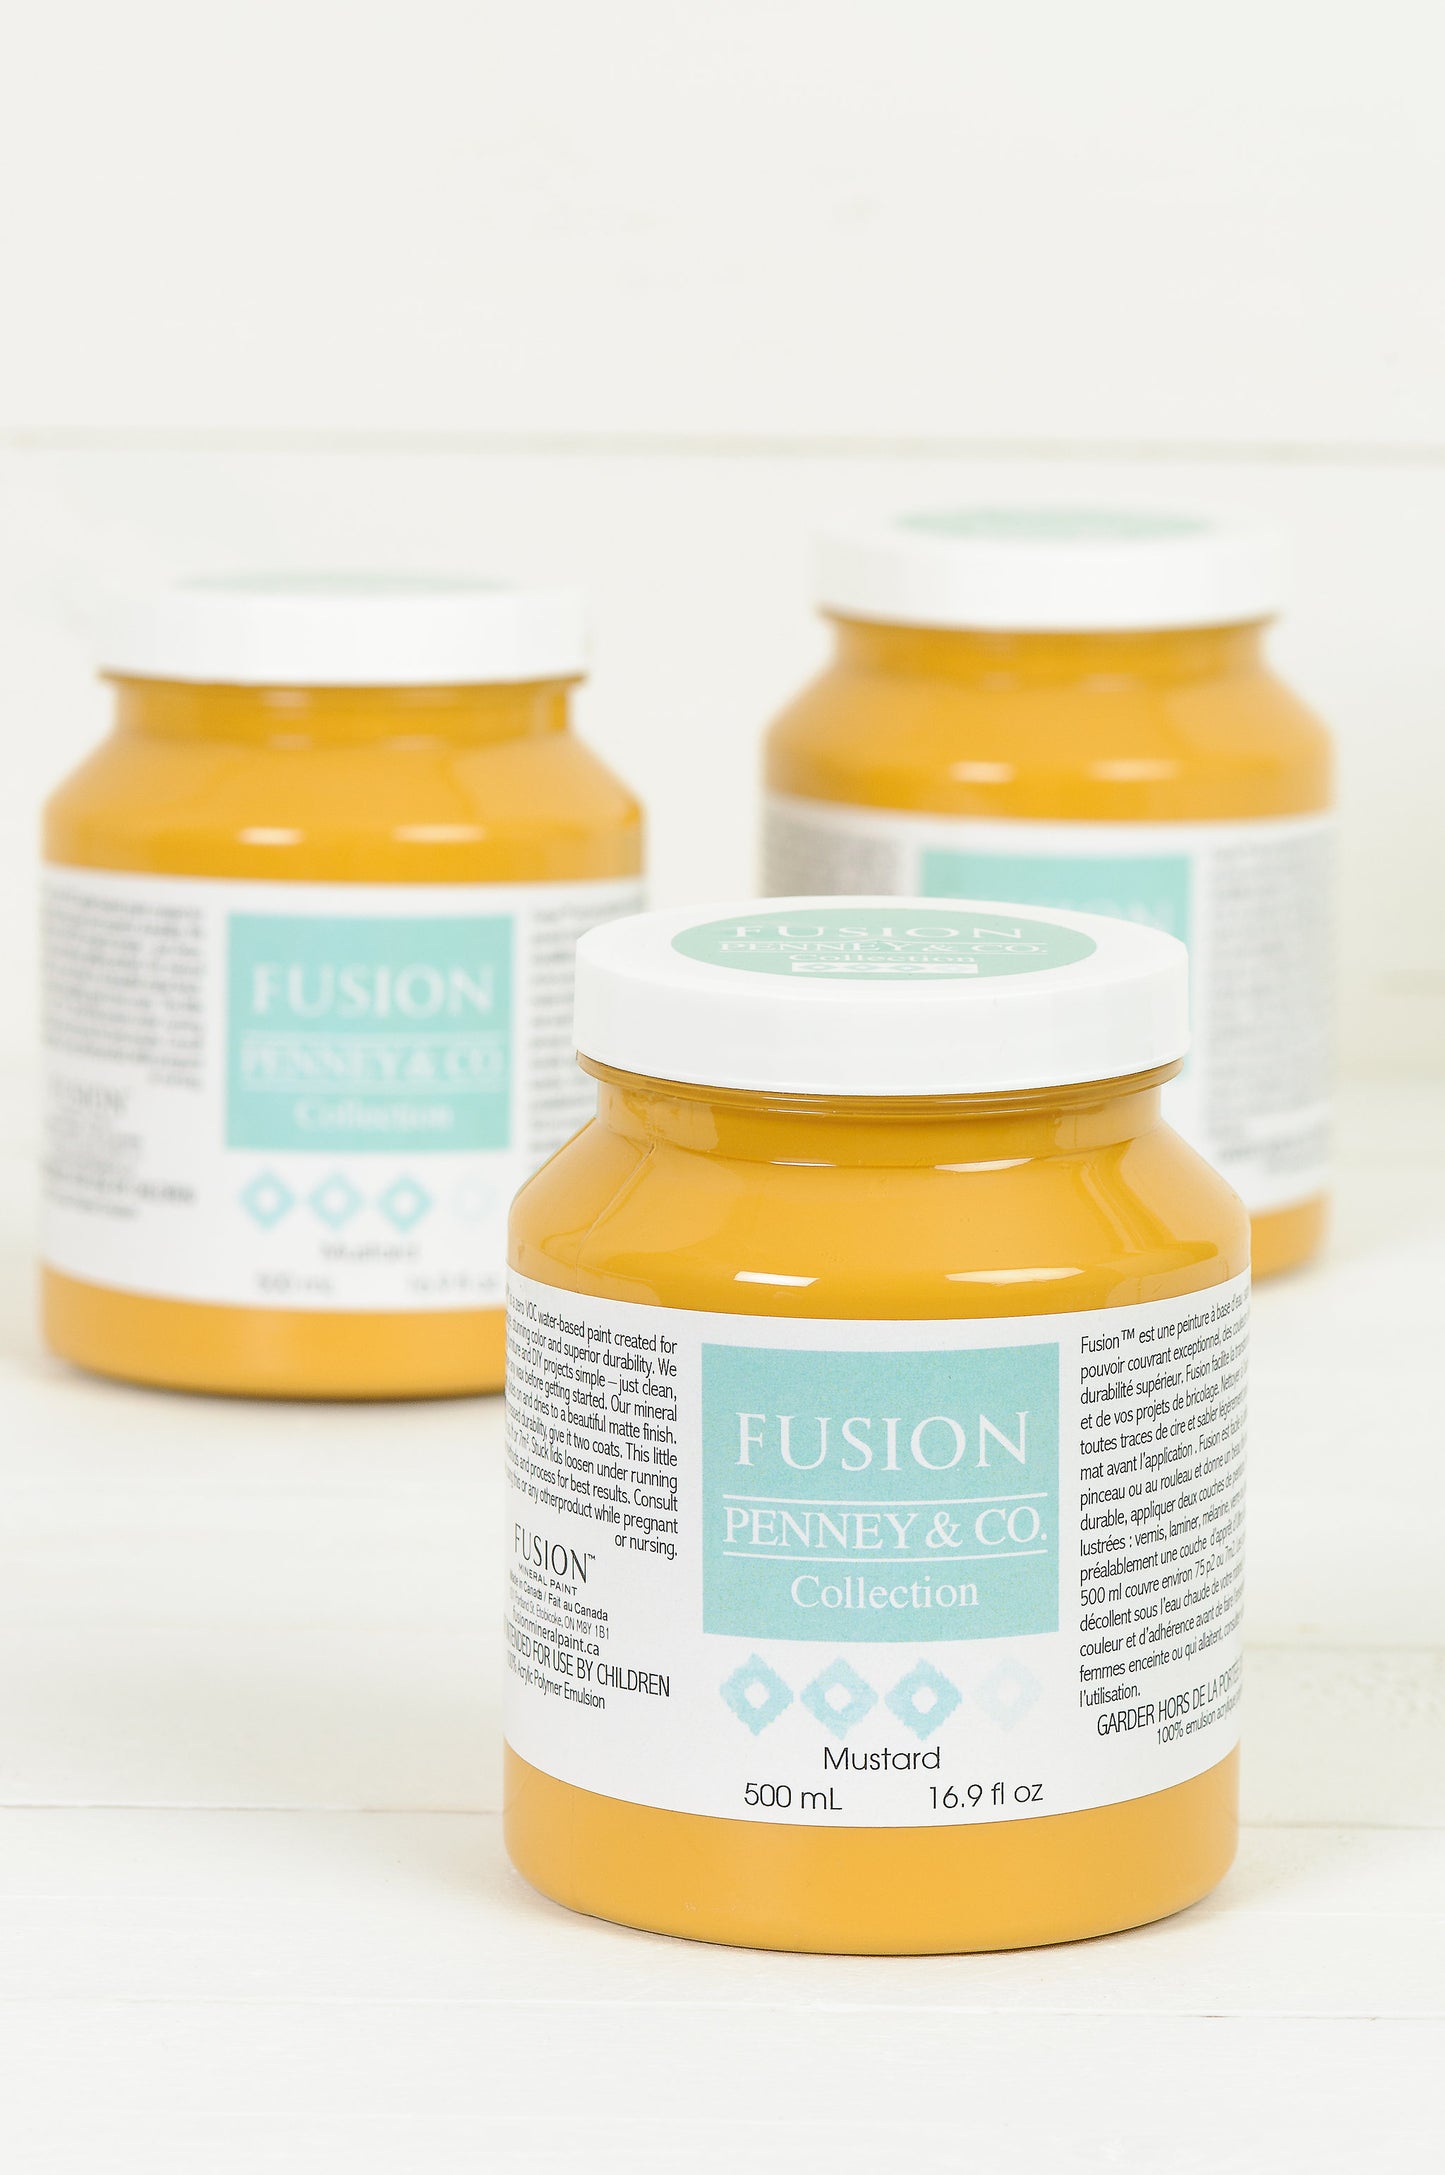 Mustard by Fusion